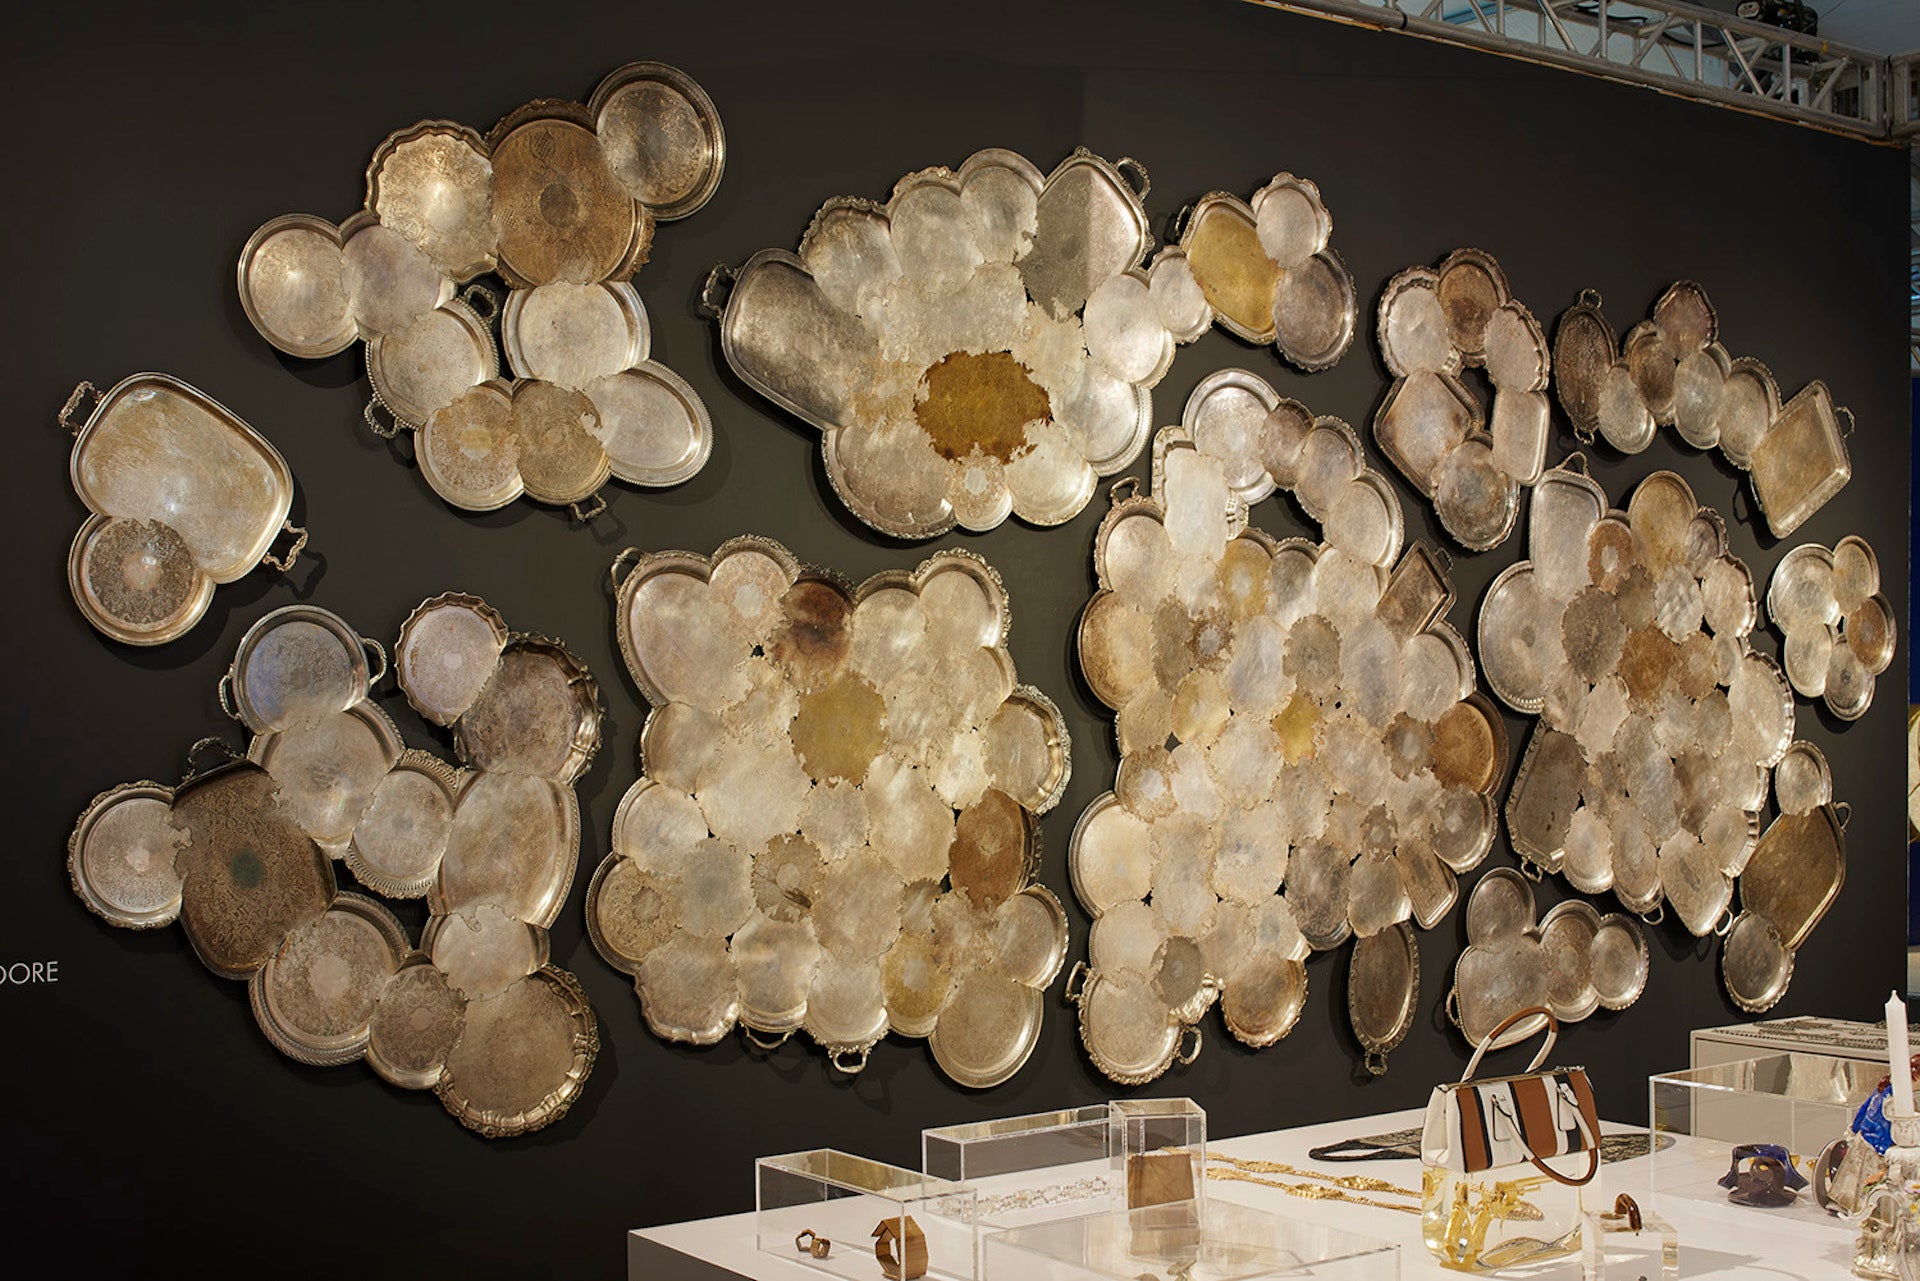 Represented by Ornamentum: Platter Scatter by Jaydan Moore, shown at Design Miami/ 2019. The National Gallery of Victoria commissioned Moore to create a 25-foot version, which will be unveiled at the museum's Triennial exhibition later this year. Photo © Ornamentum